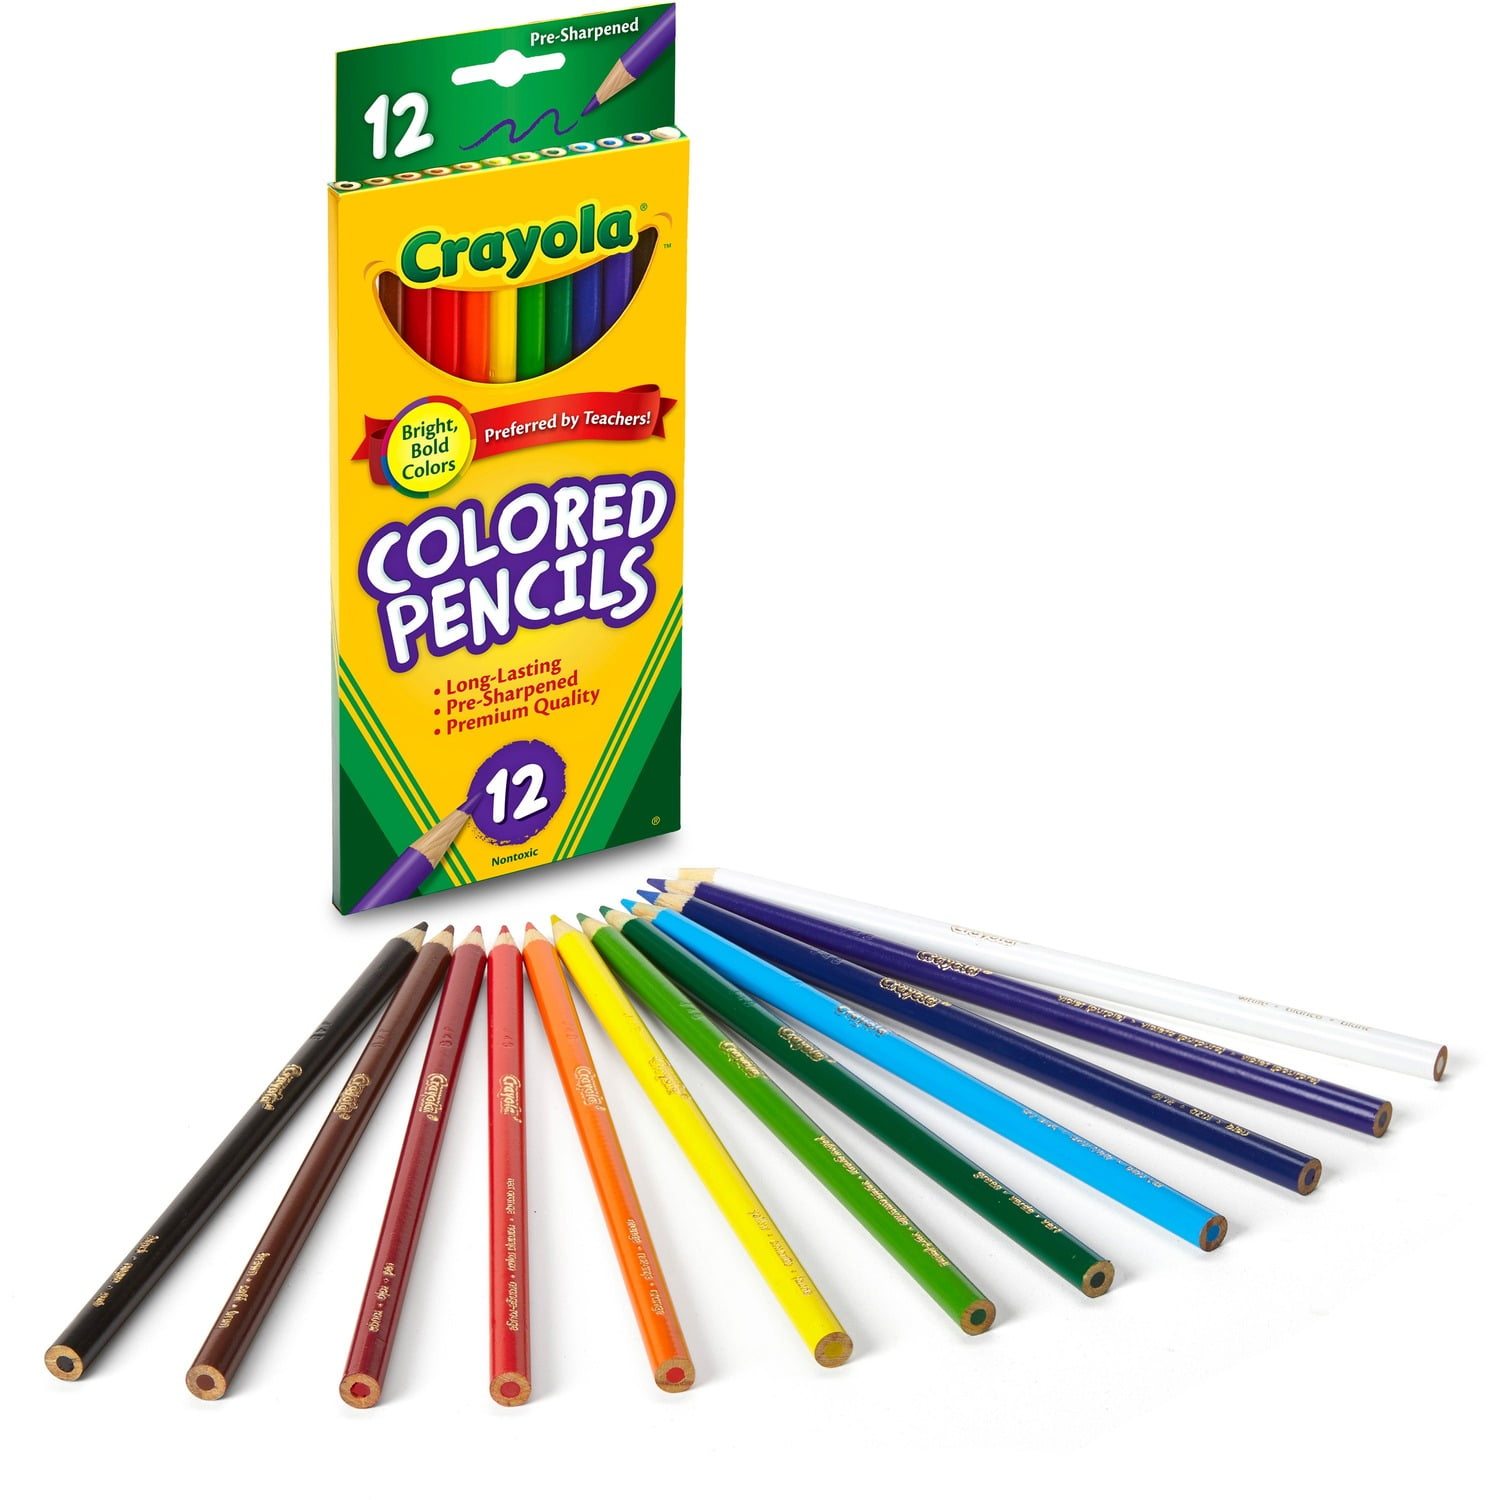 Crayola Colored Pencils ONLY $...